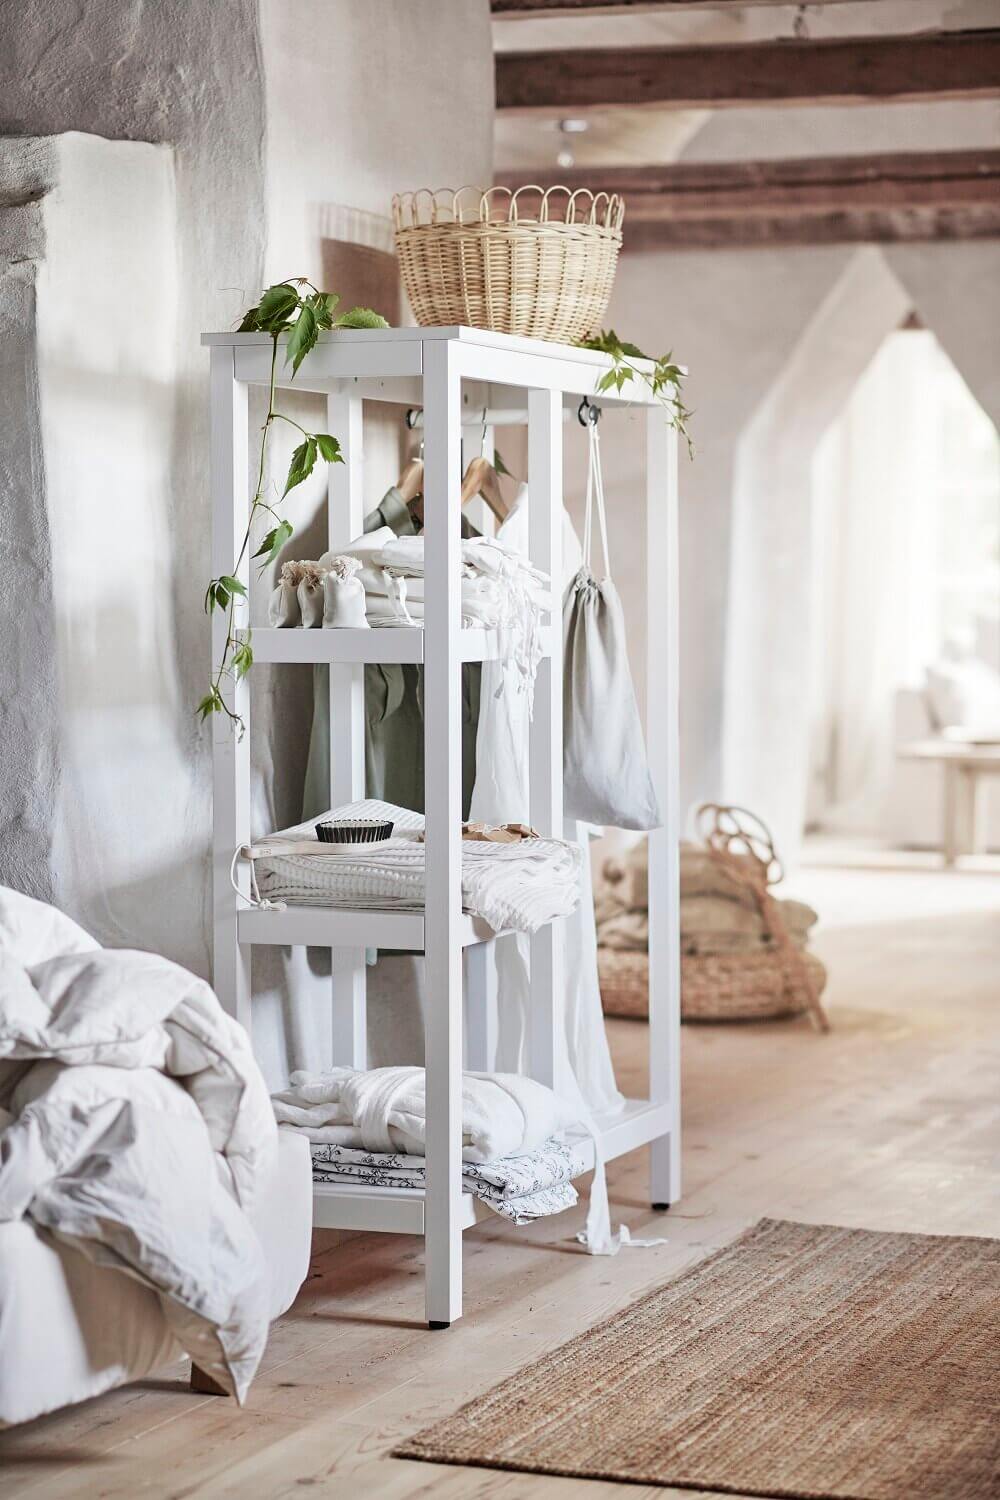 ikea spring collection 2020 mindful living nordroom29 IKEA Spring Collection 2020: Mindful Living and Close to Nature